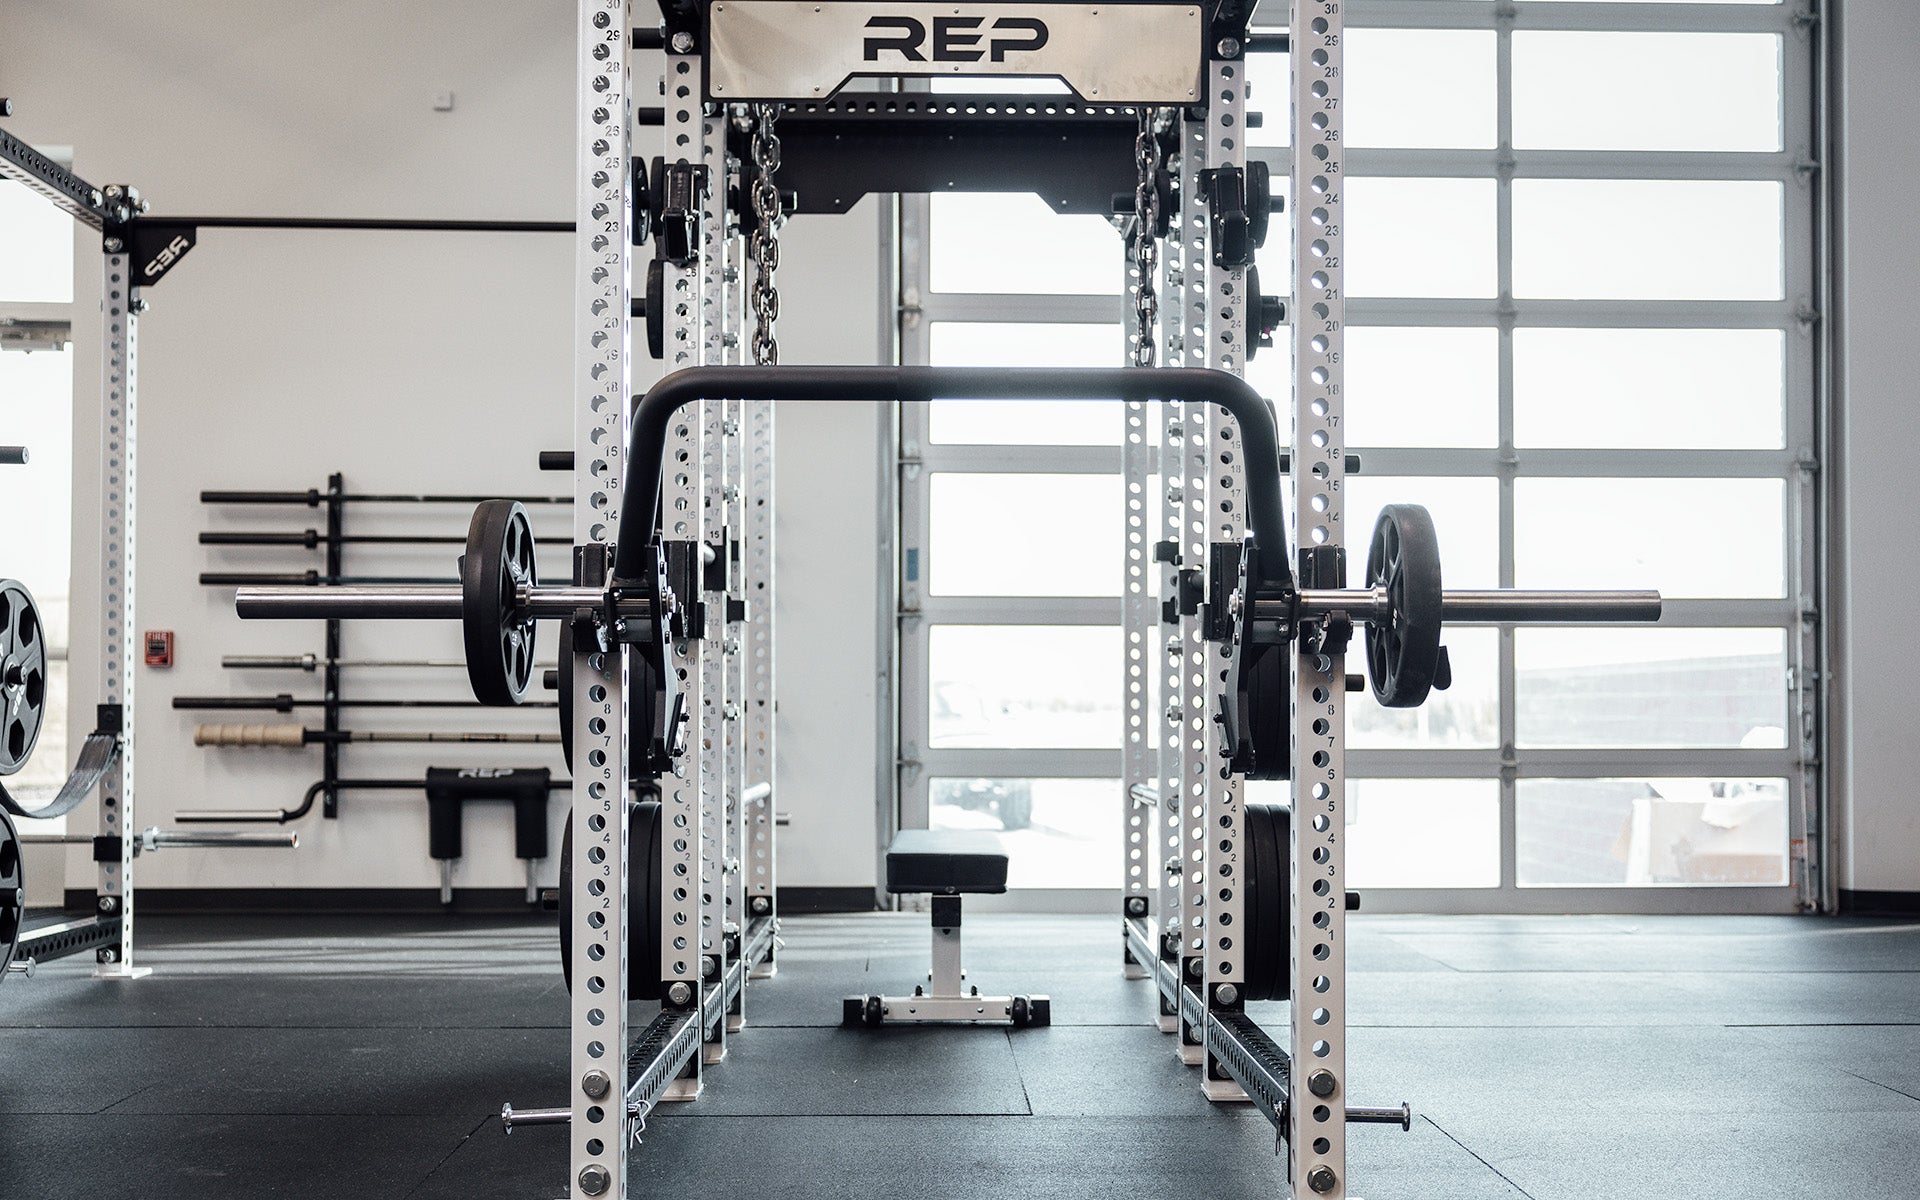 REP Open Trap Bar loaded with 25lb plates and racked in a REP PR-5000 rack.